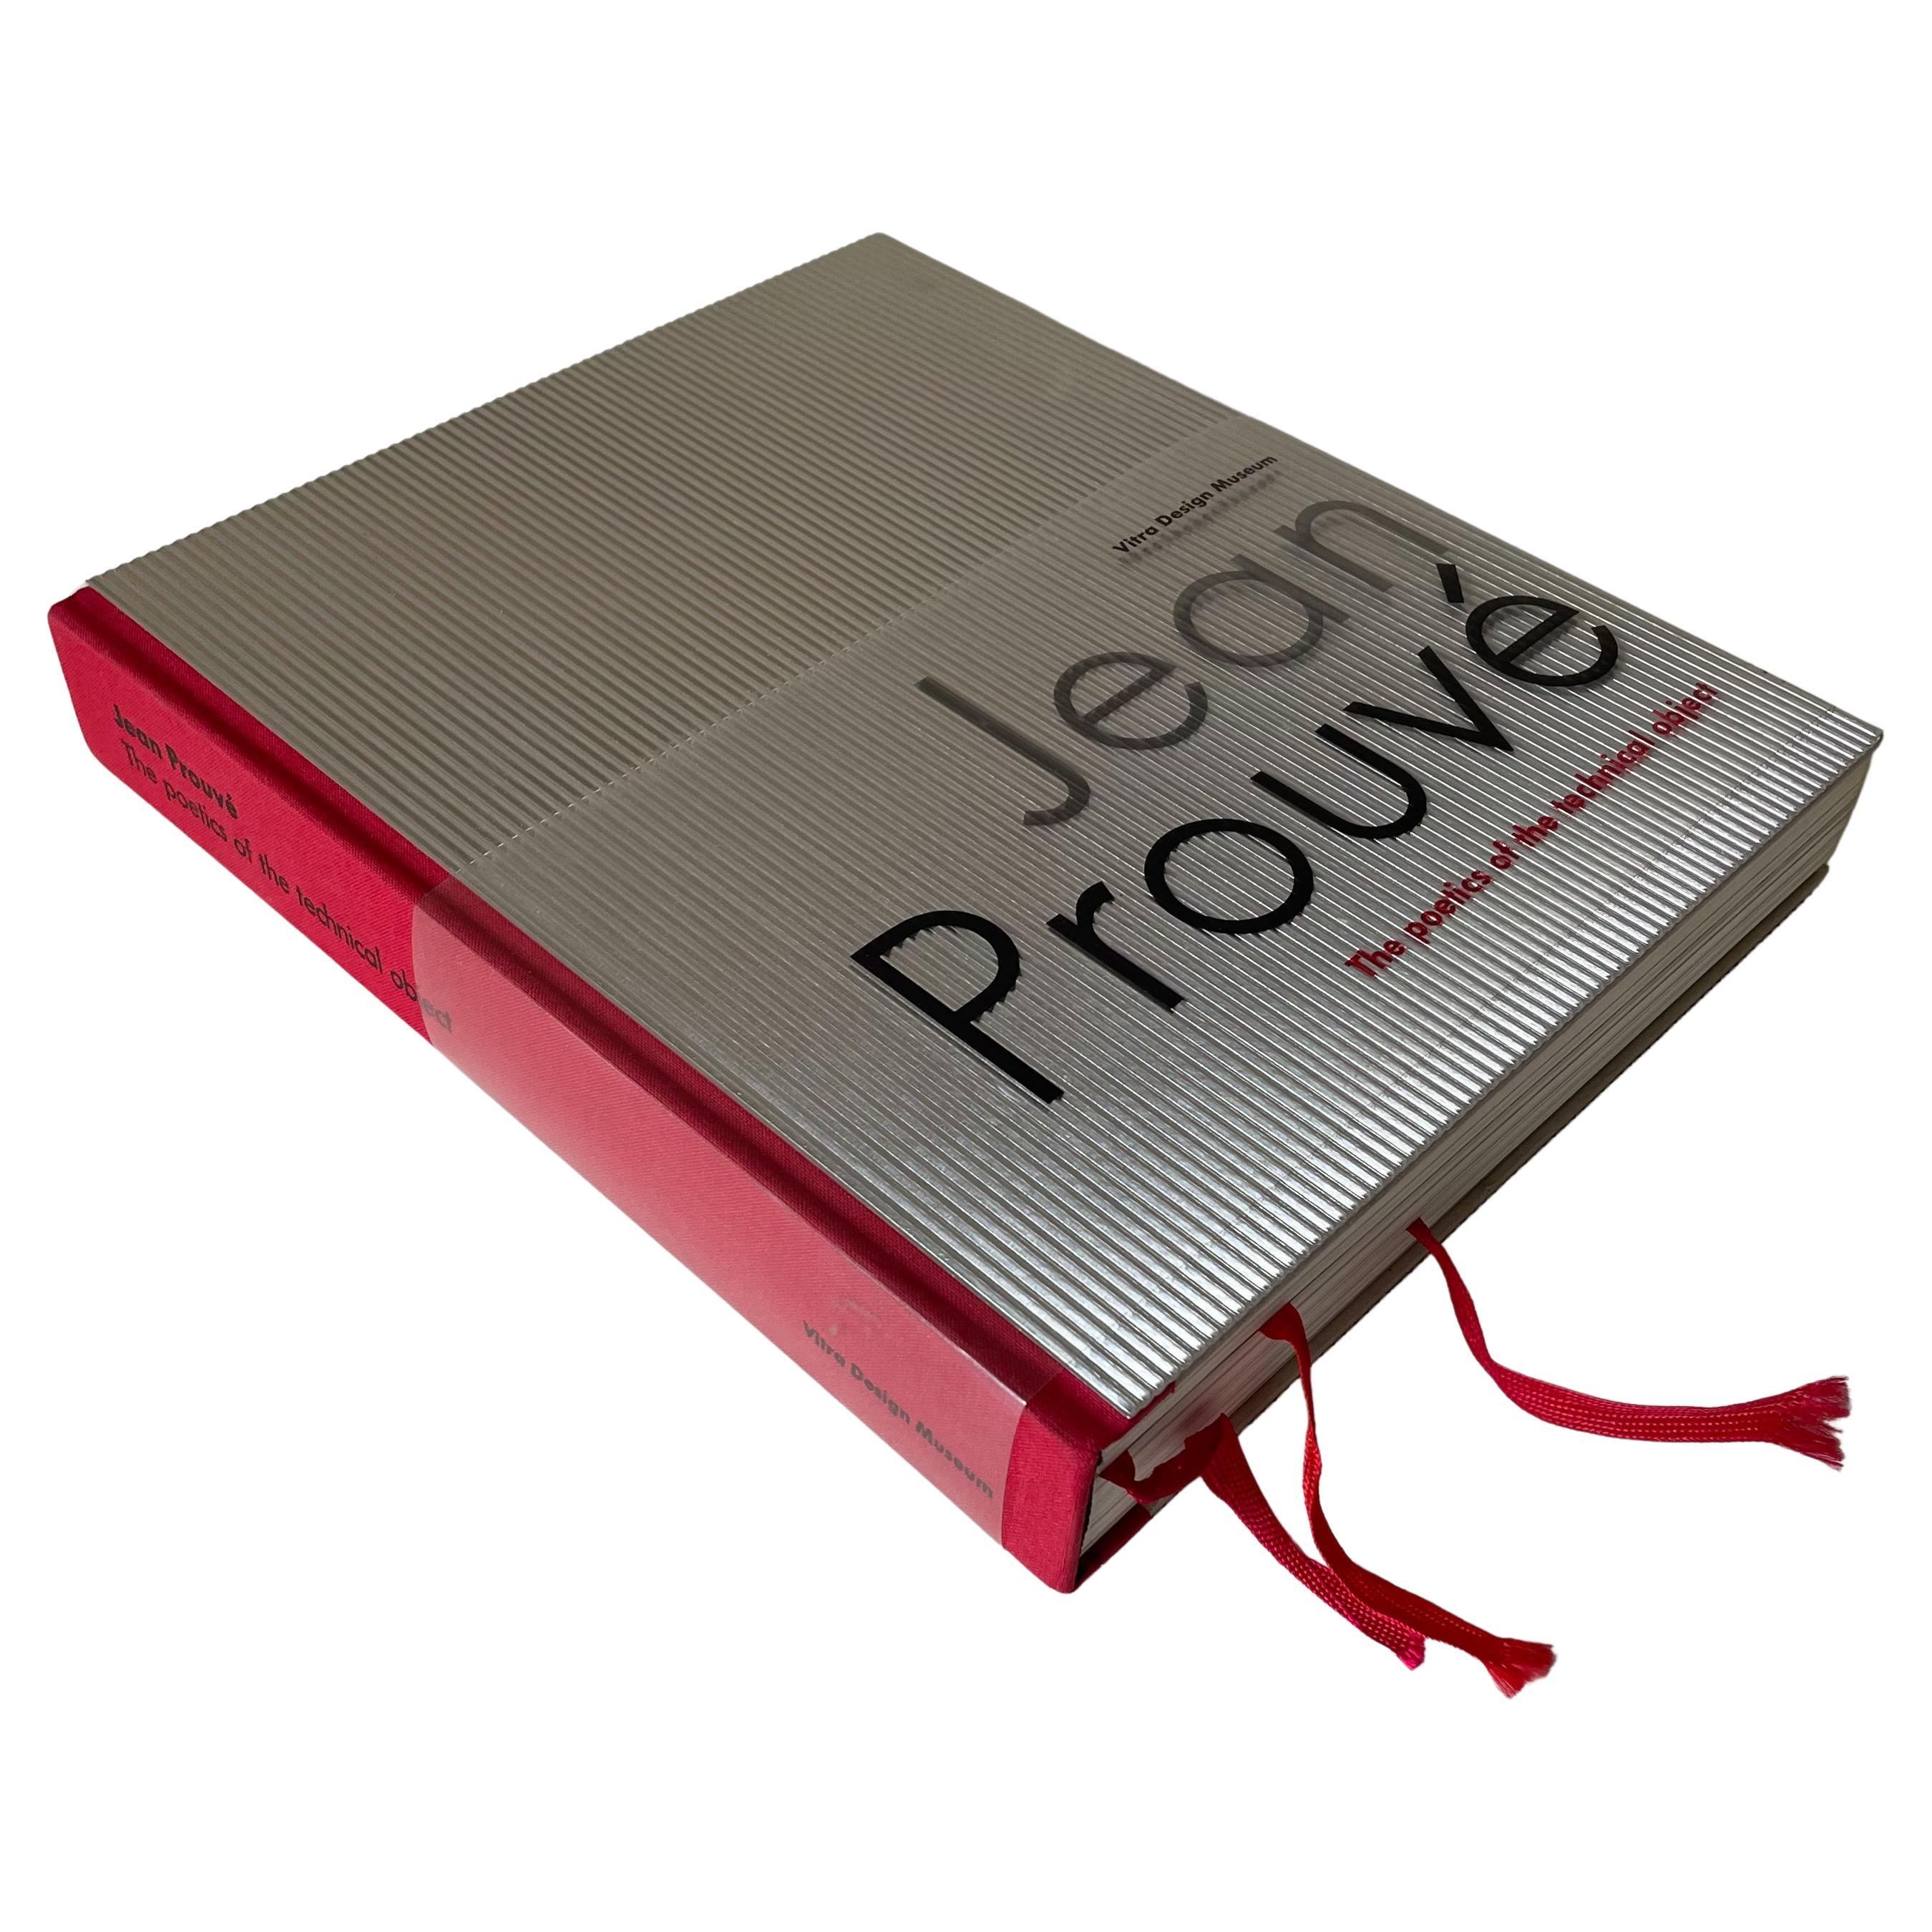 Jean Prouve, the Poetics of the Technical Object For Sale